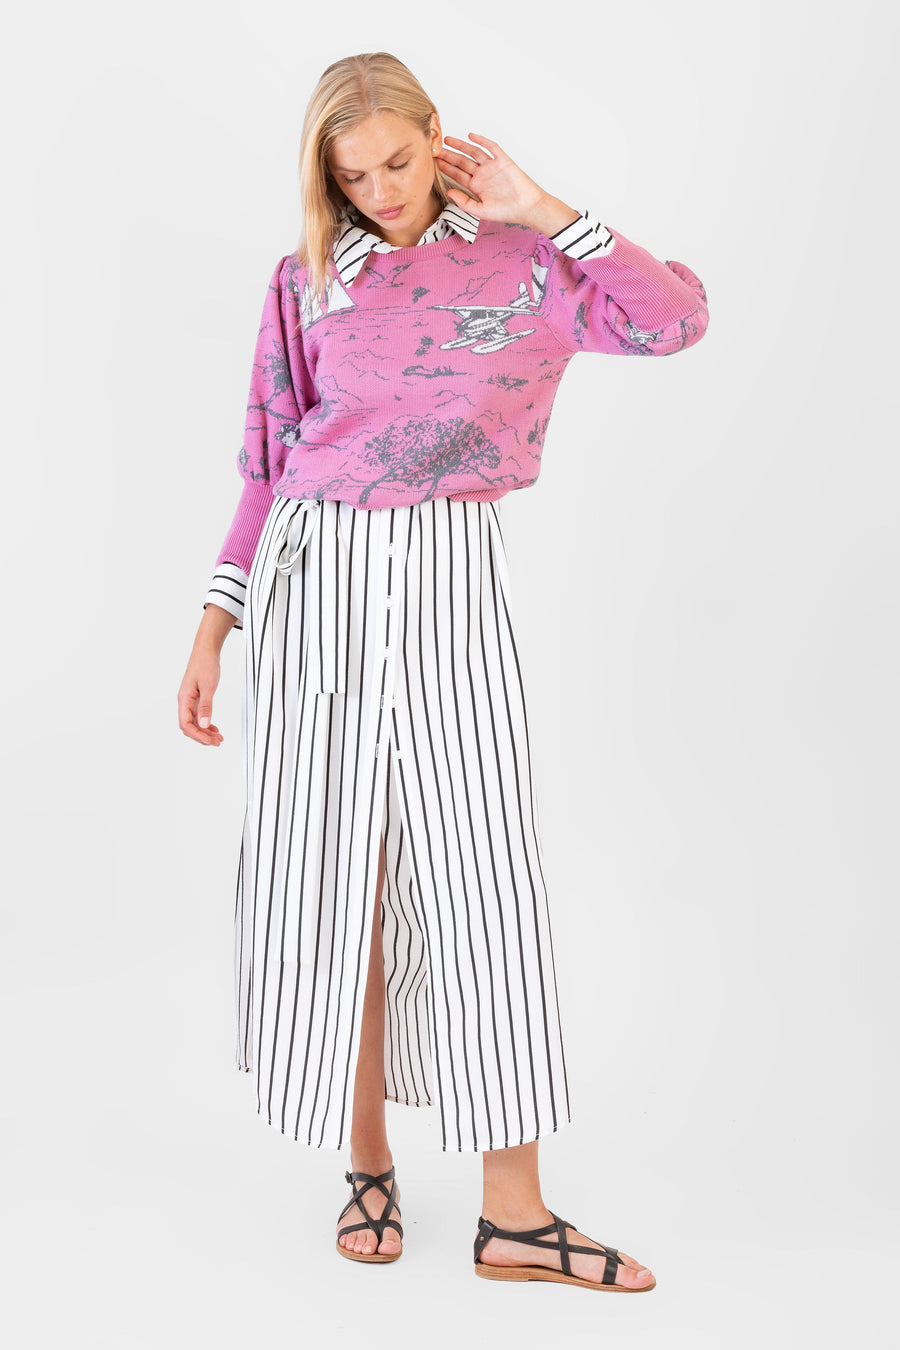 Madeline Sweater Le Beach Club Toile Pink